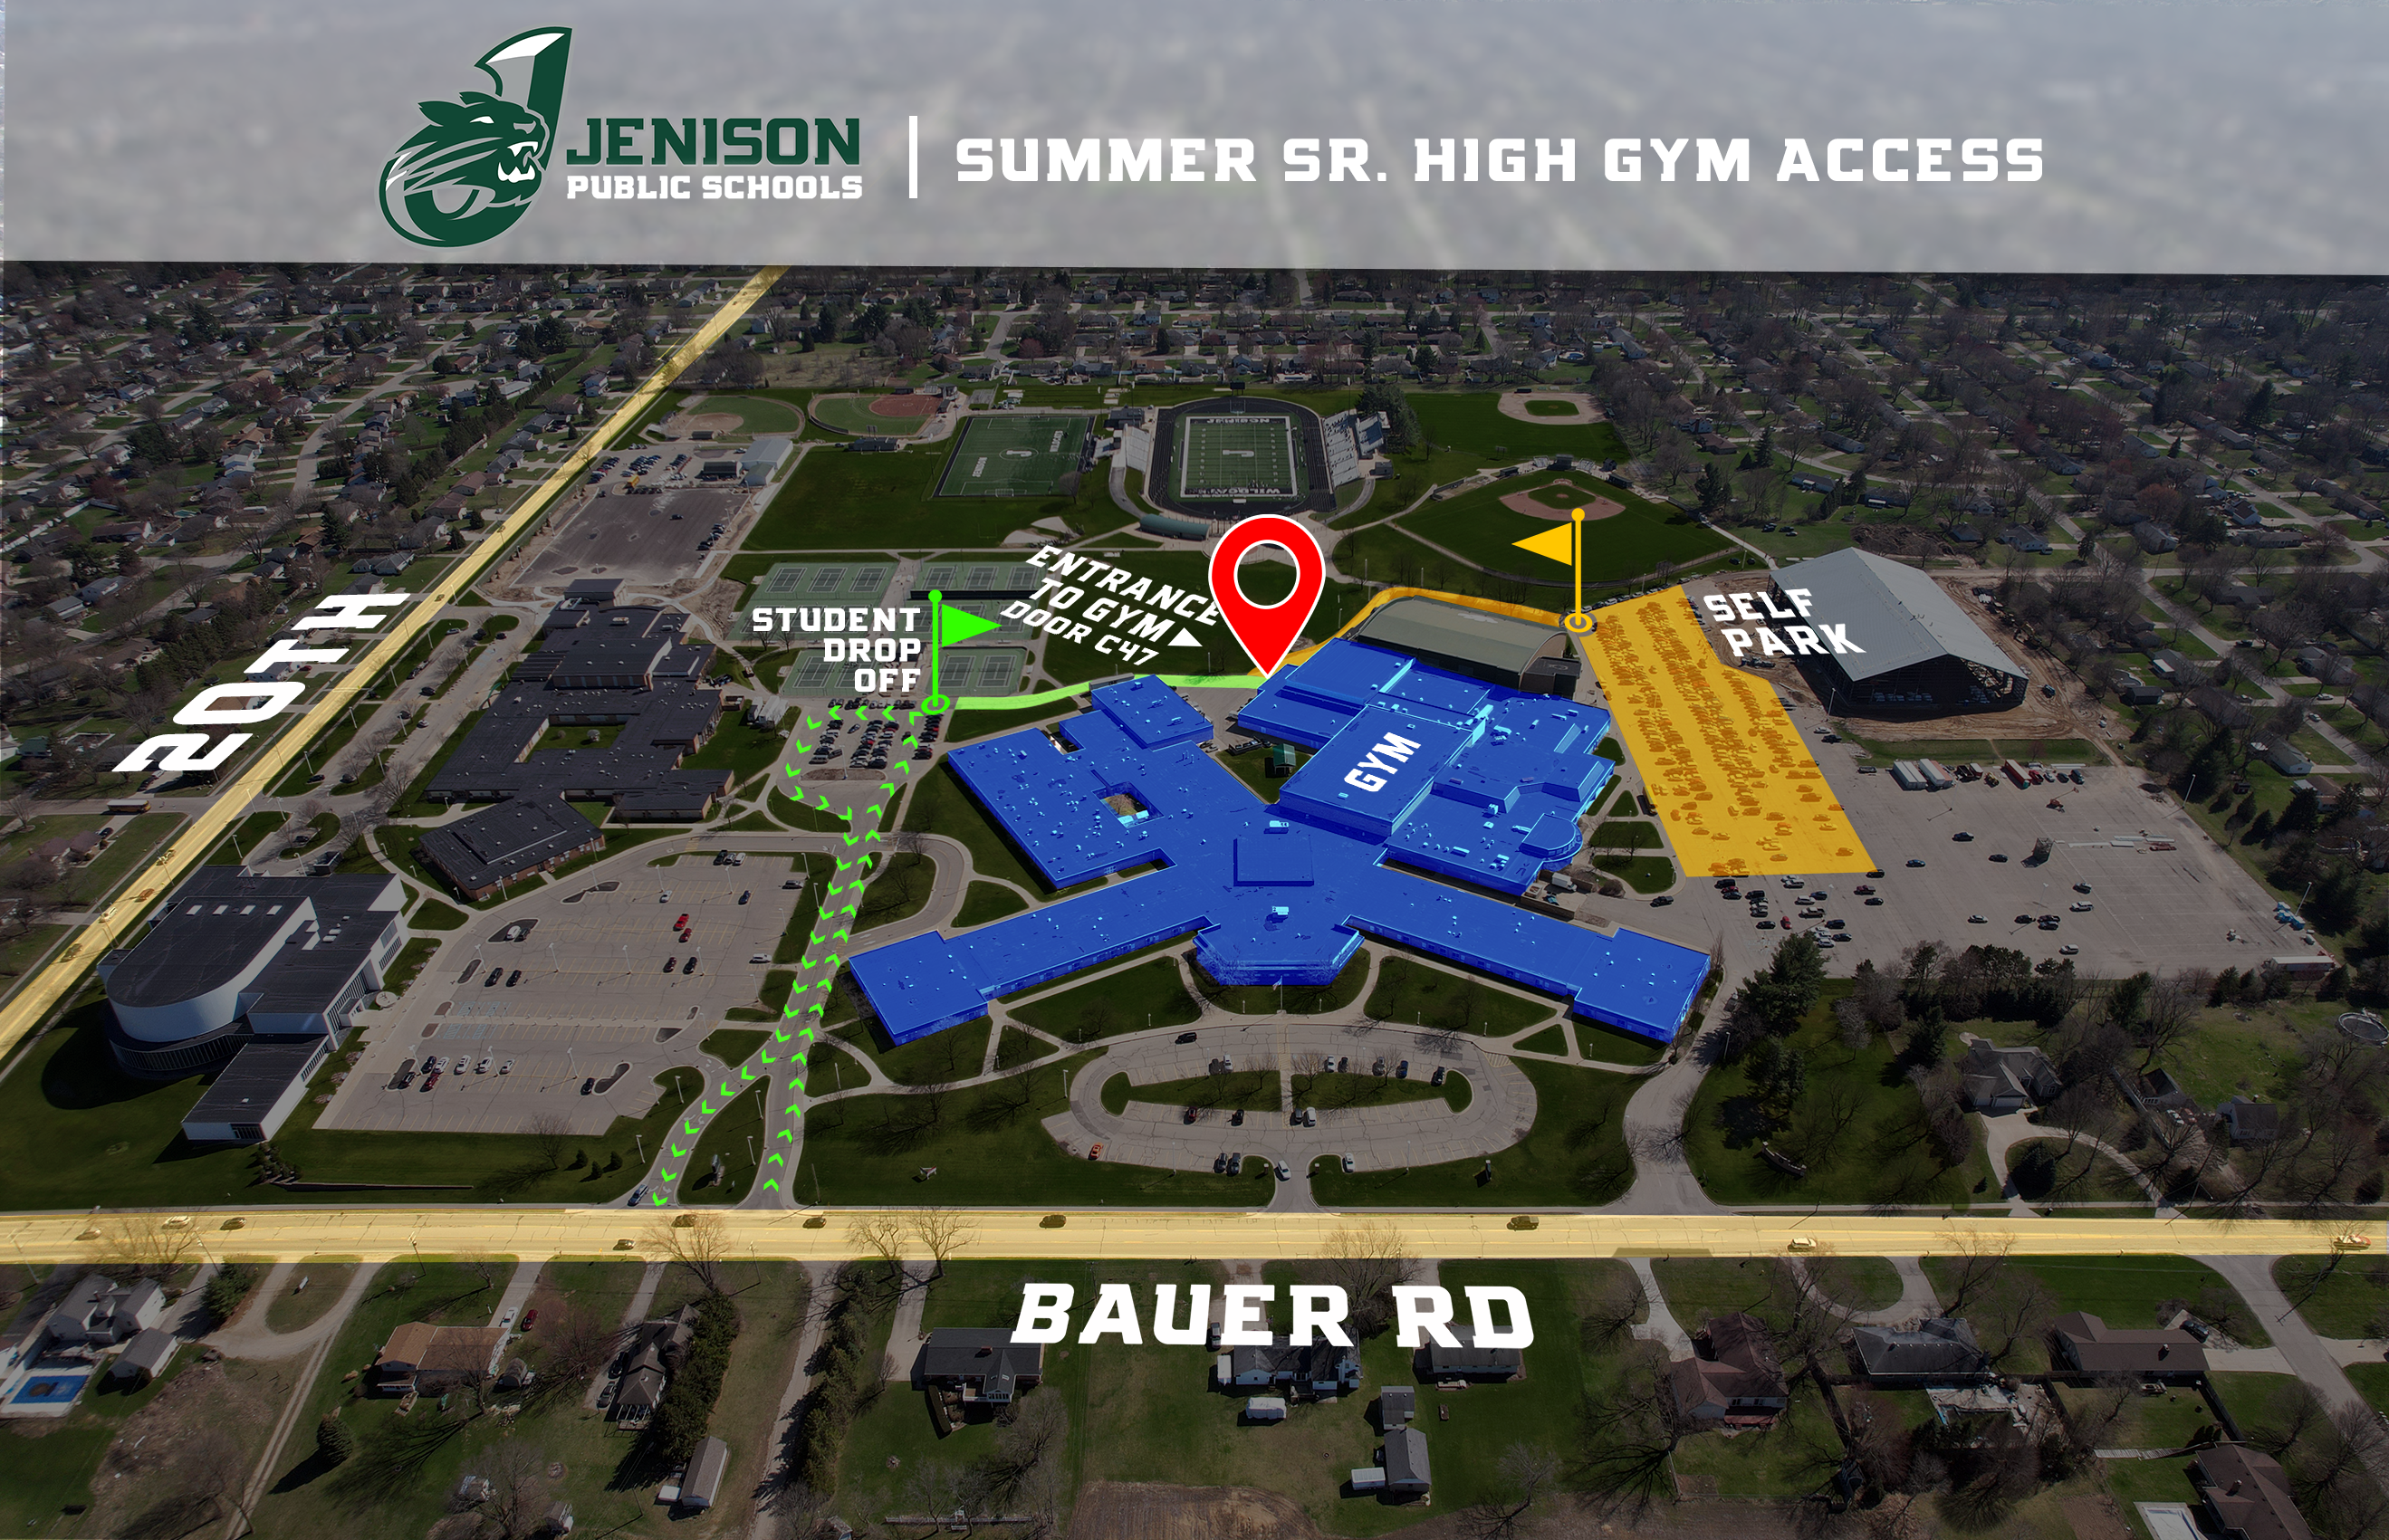 Map of access points to HS gym for summer